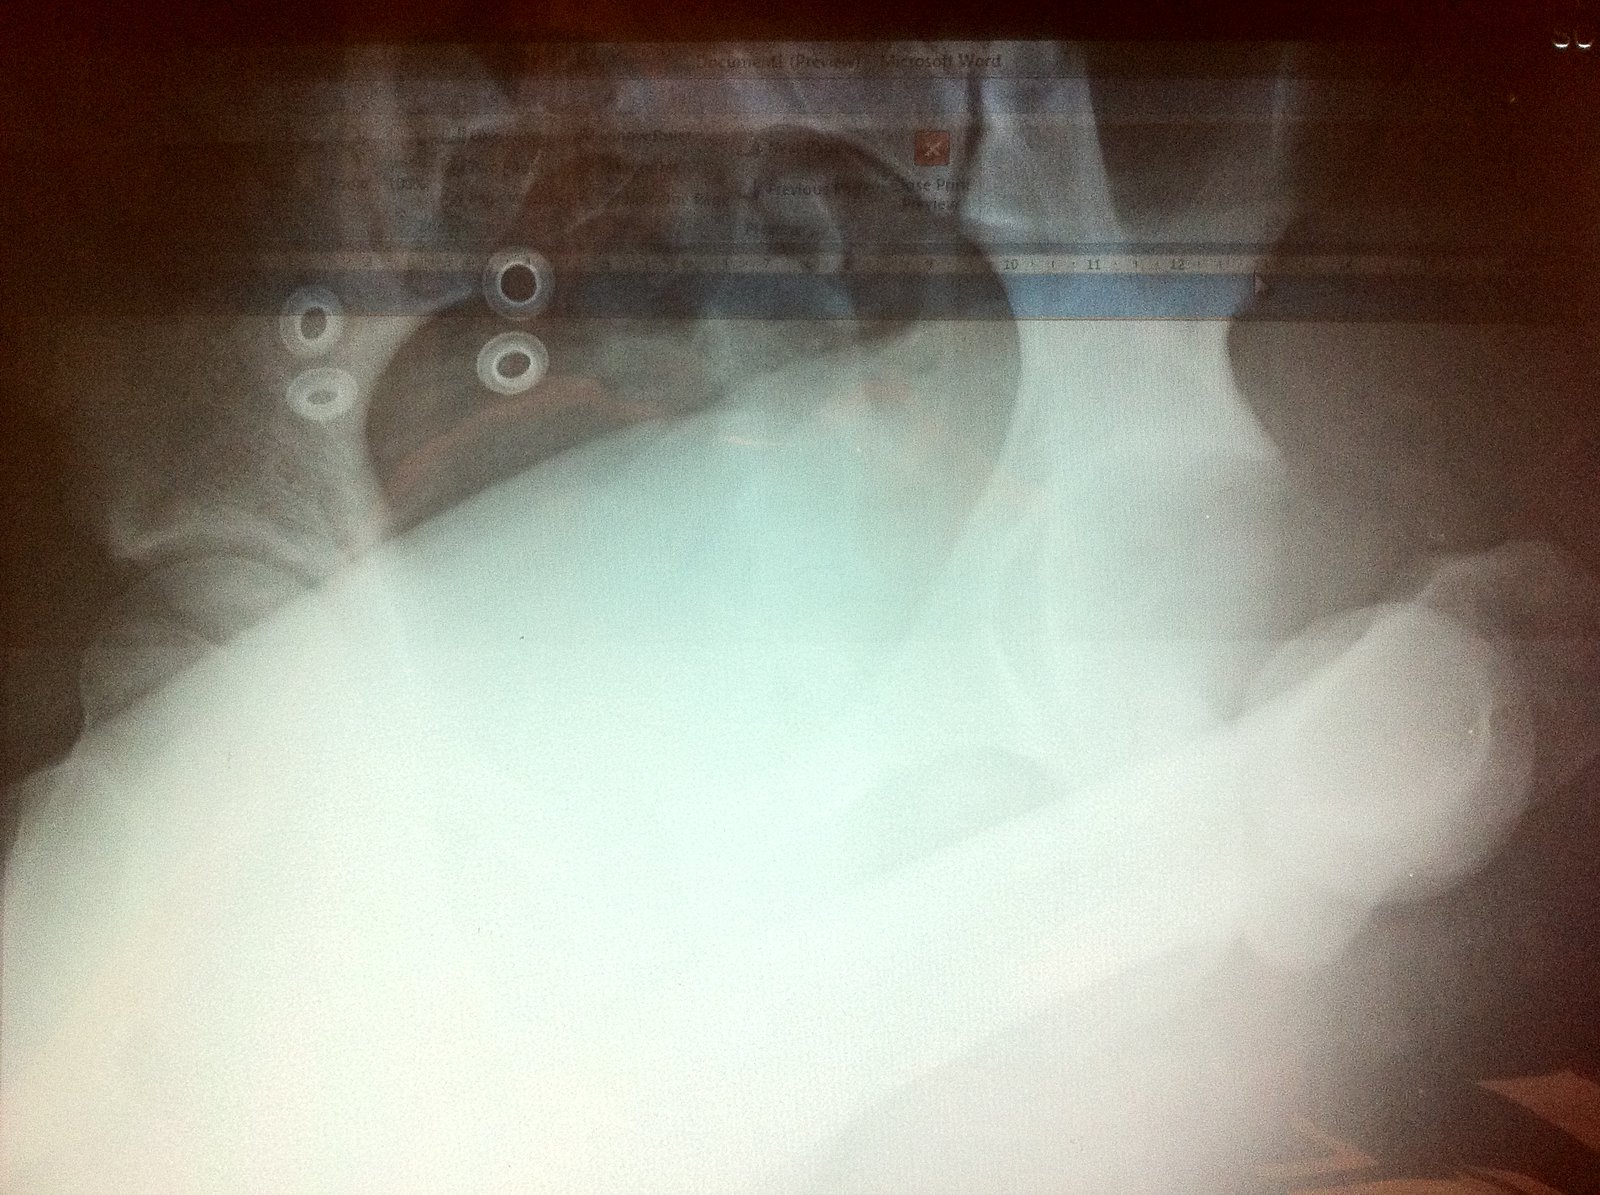 Dislocated hip